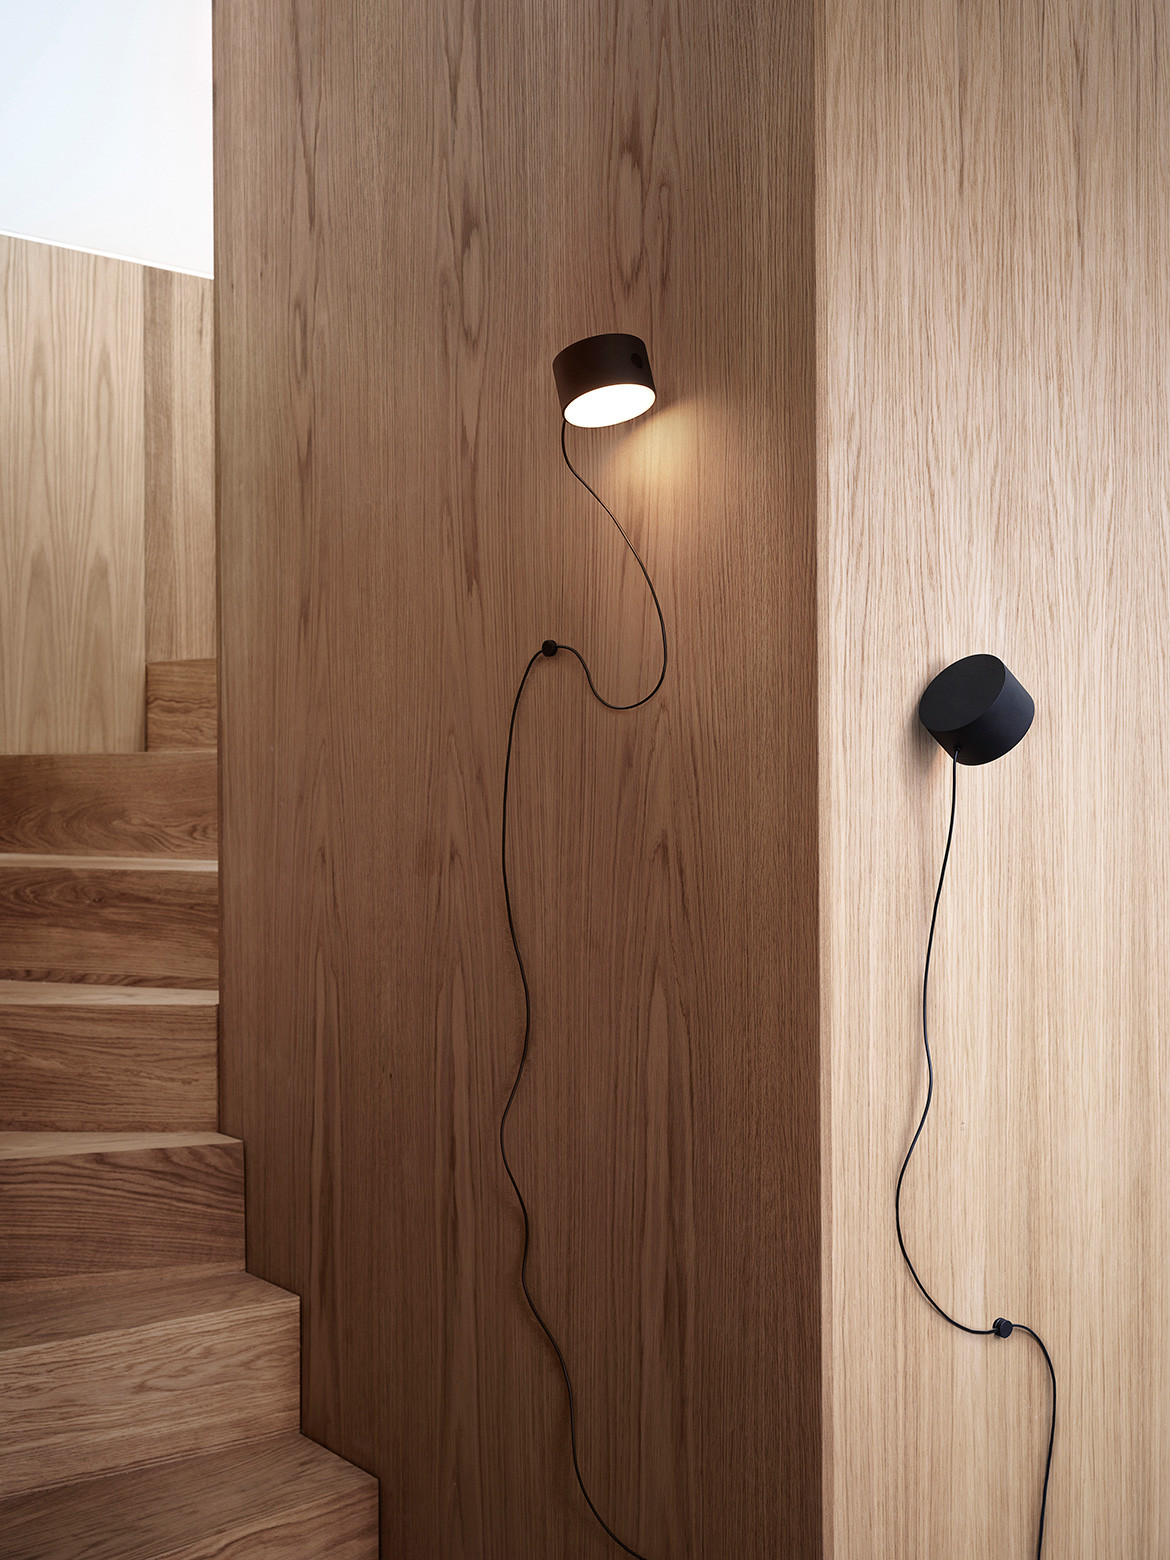 Post Wall Lamp by Earnest Studio for Muuto Spring 2020